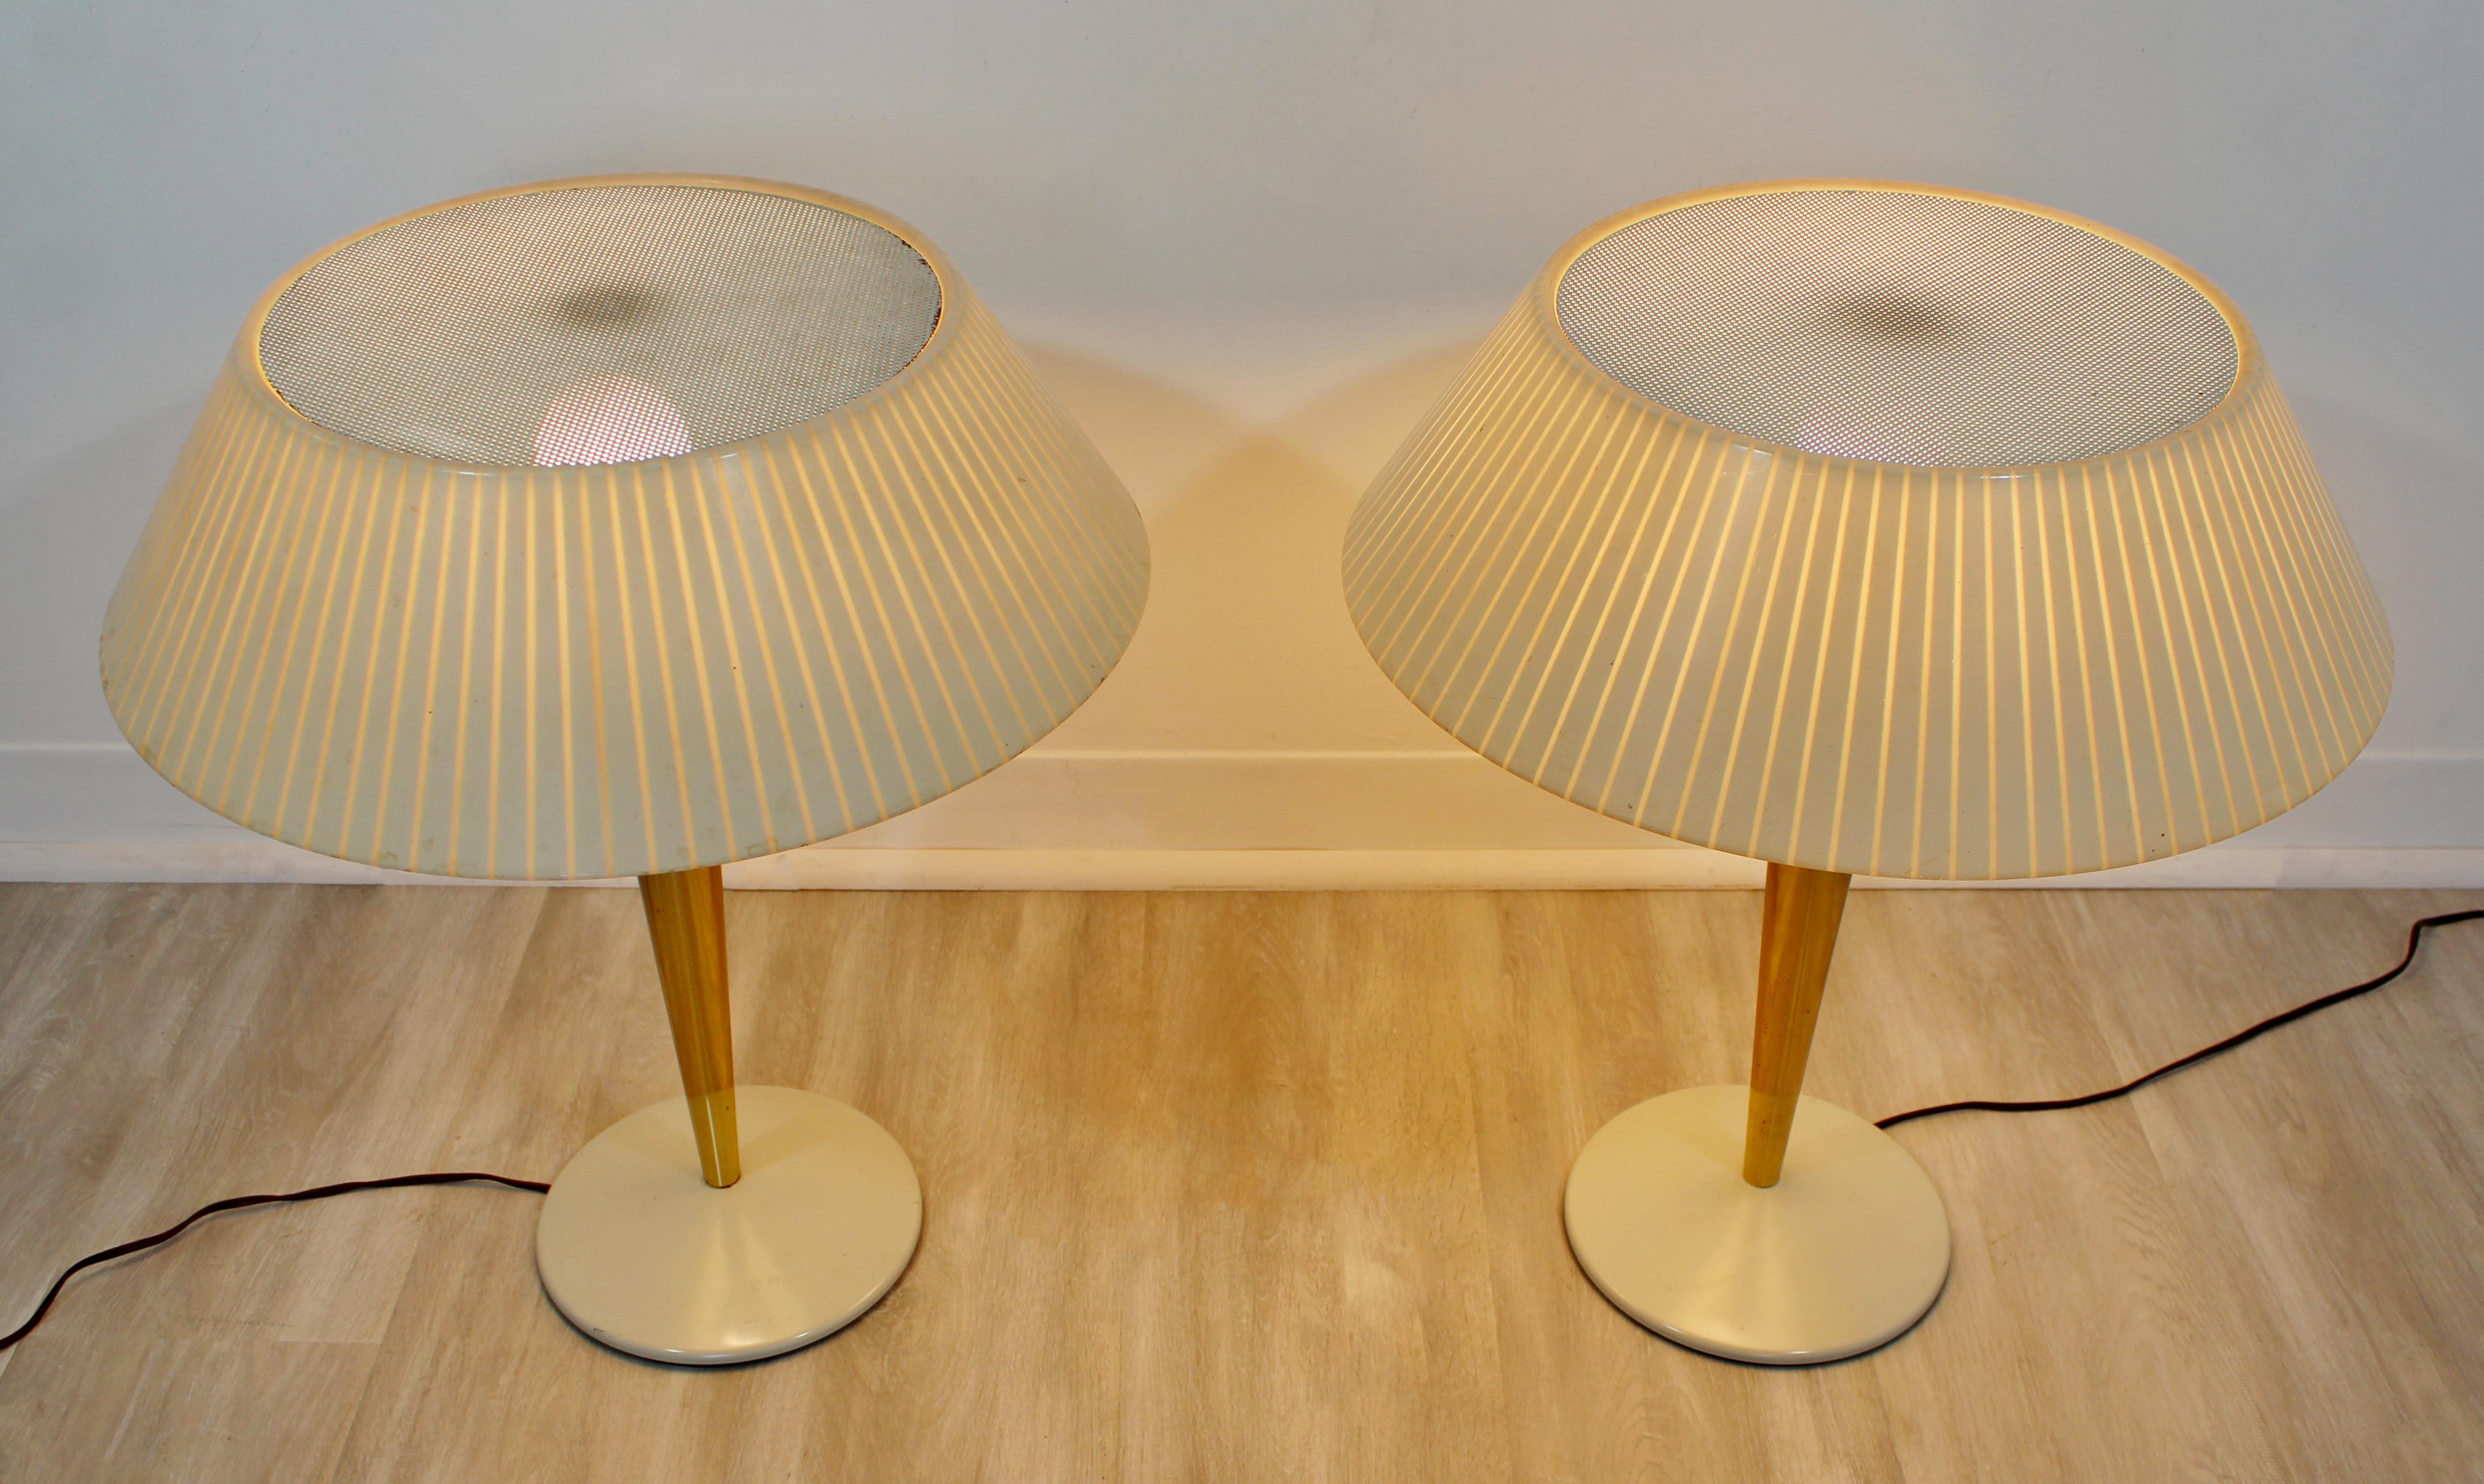 For your consideration is a fabulous pair of brass table lamps, designed by Gerald Thurston for Lightolier, circa the 1960s. In very good condition, with a patina to match age and use. The dimensions are 18